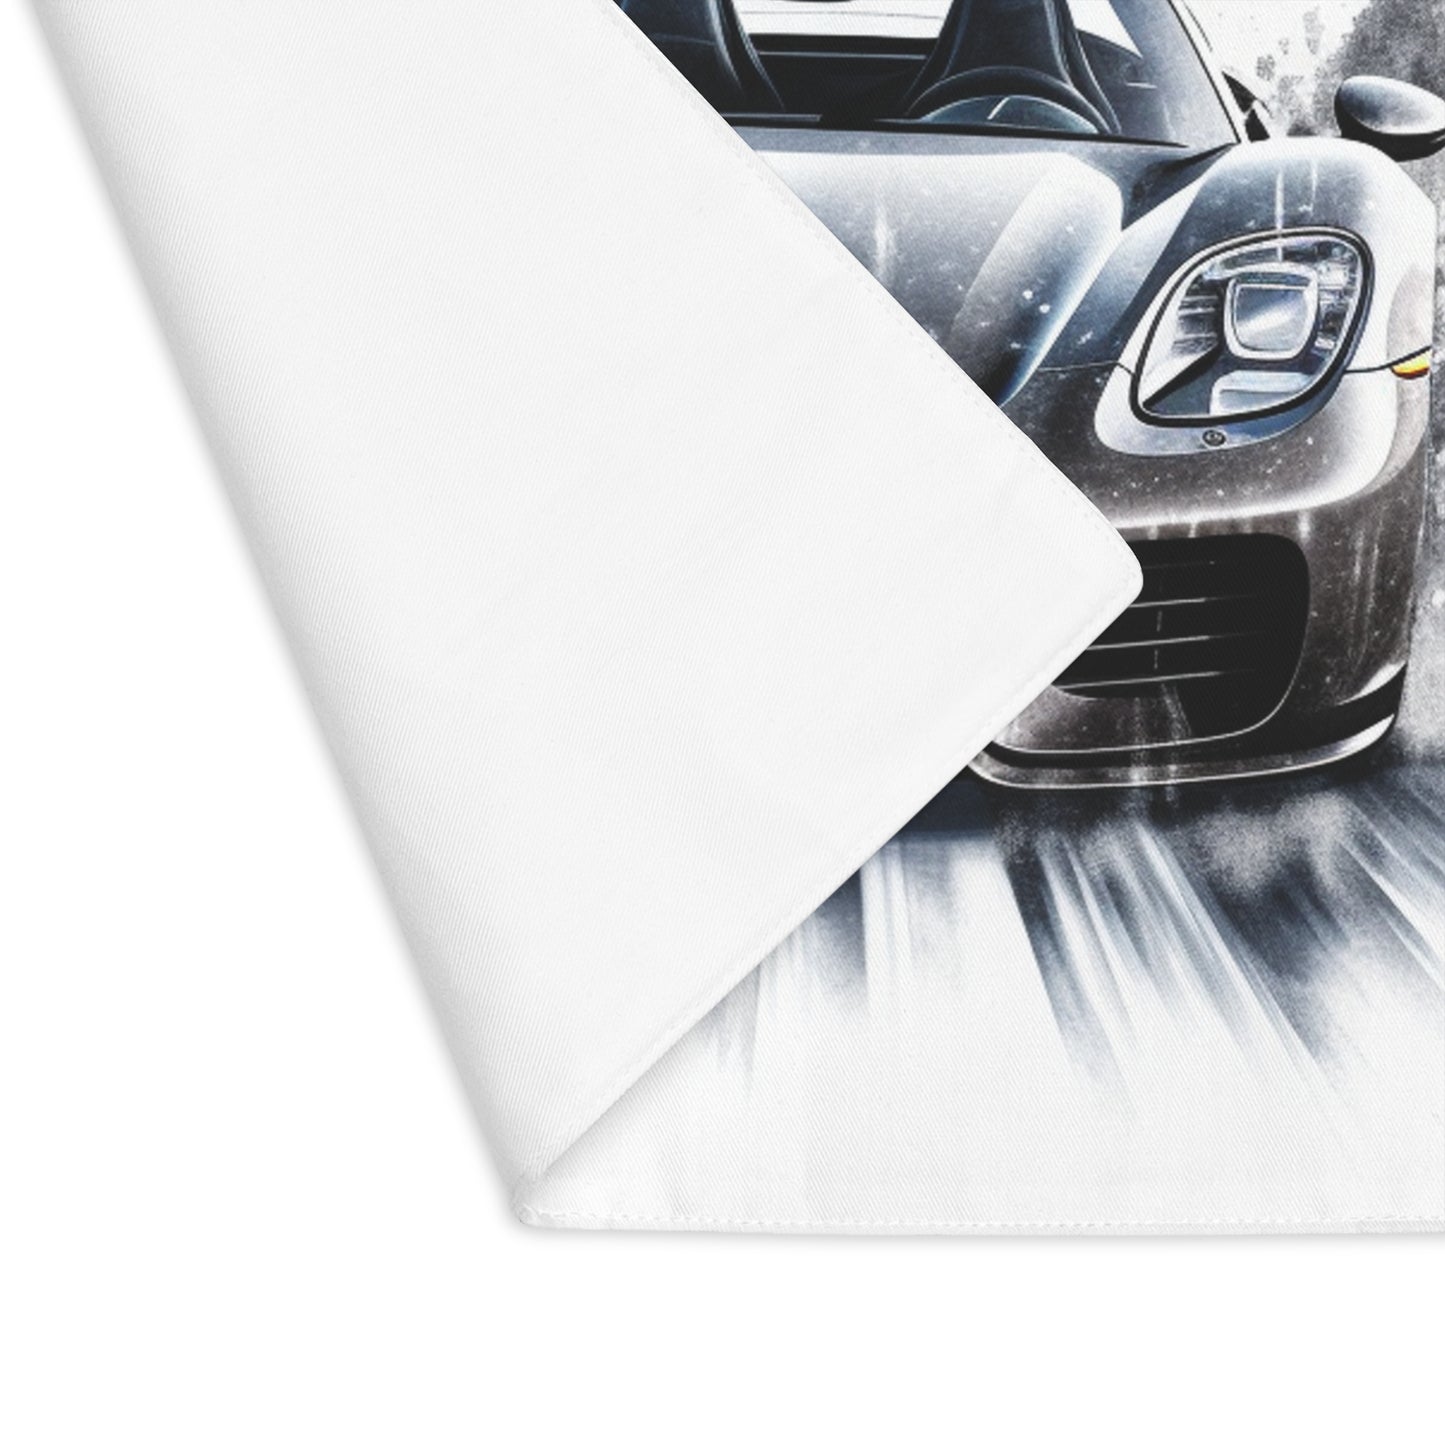 Placemat, 1pc 918 Spyder white background driving fast with water splashing 3